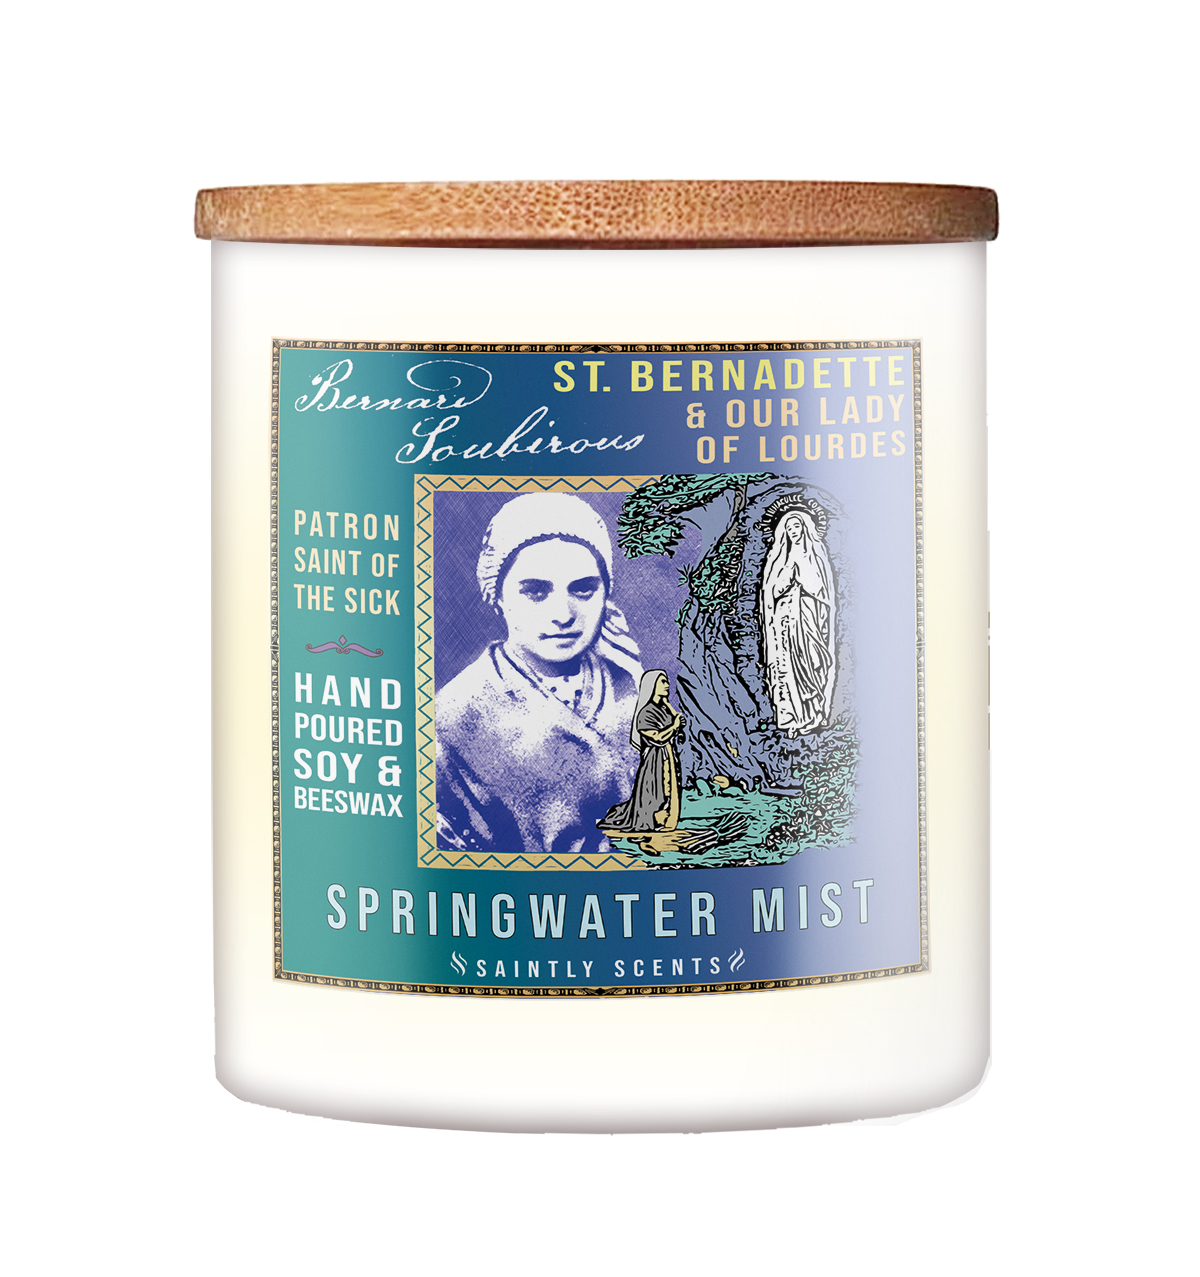 St. Bernadette and Our Lady of Lourdes Springwater Mist Scented Candle